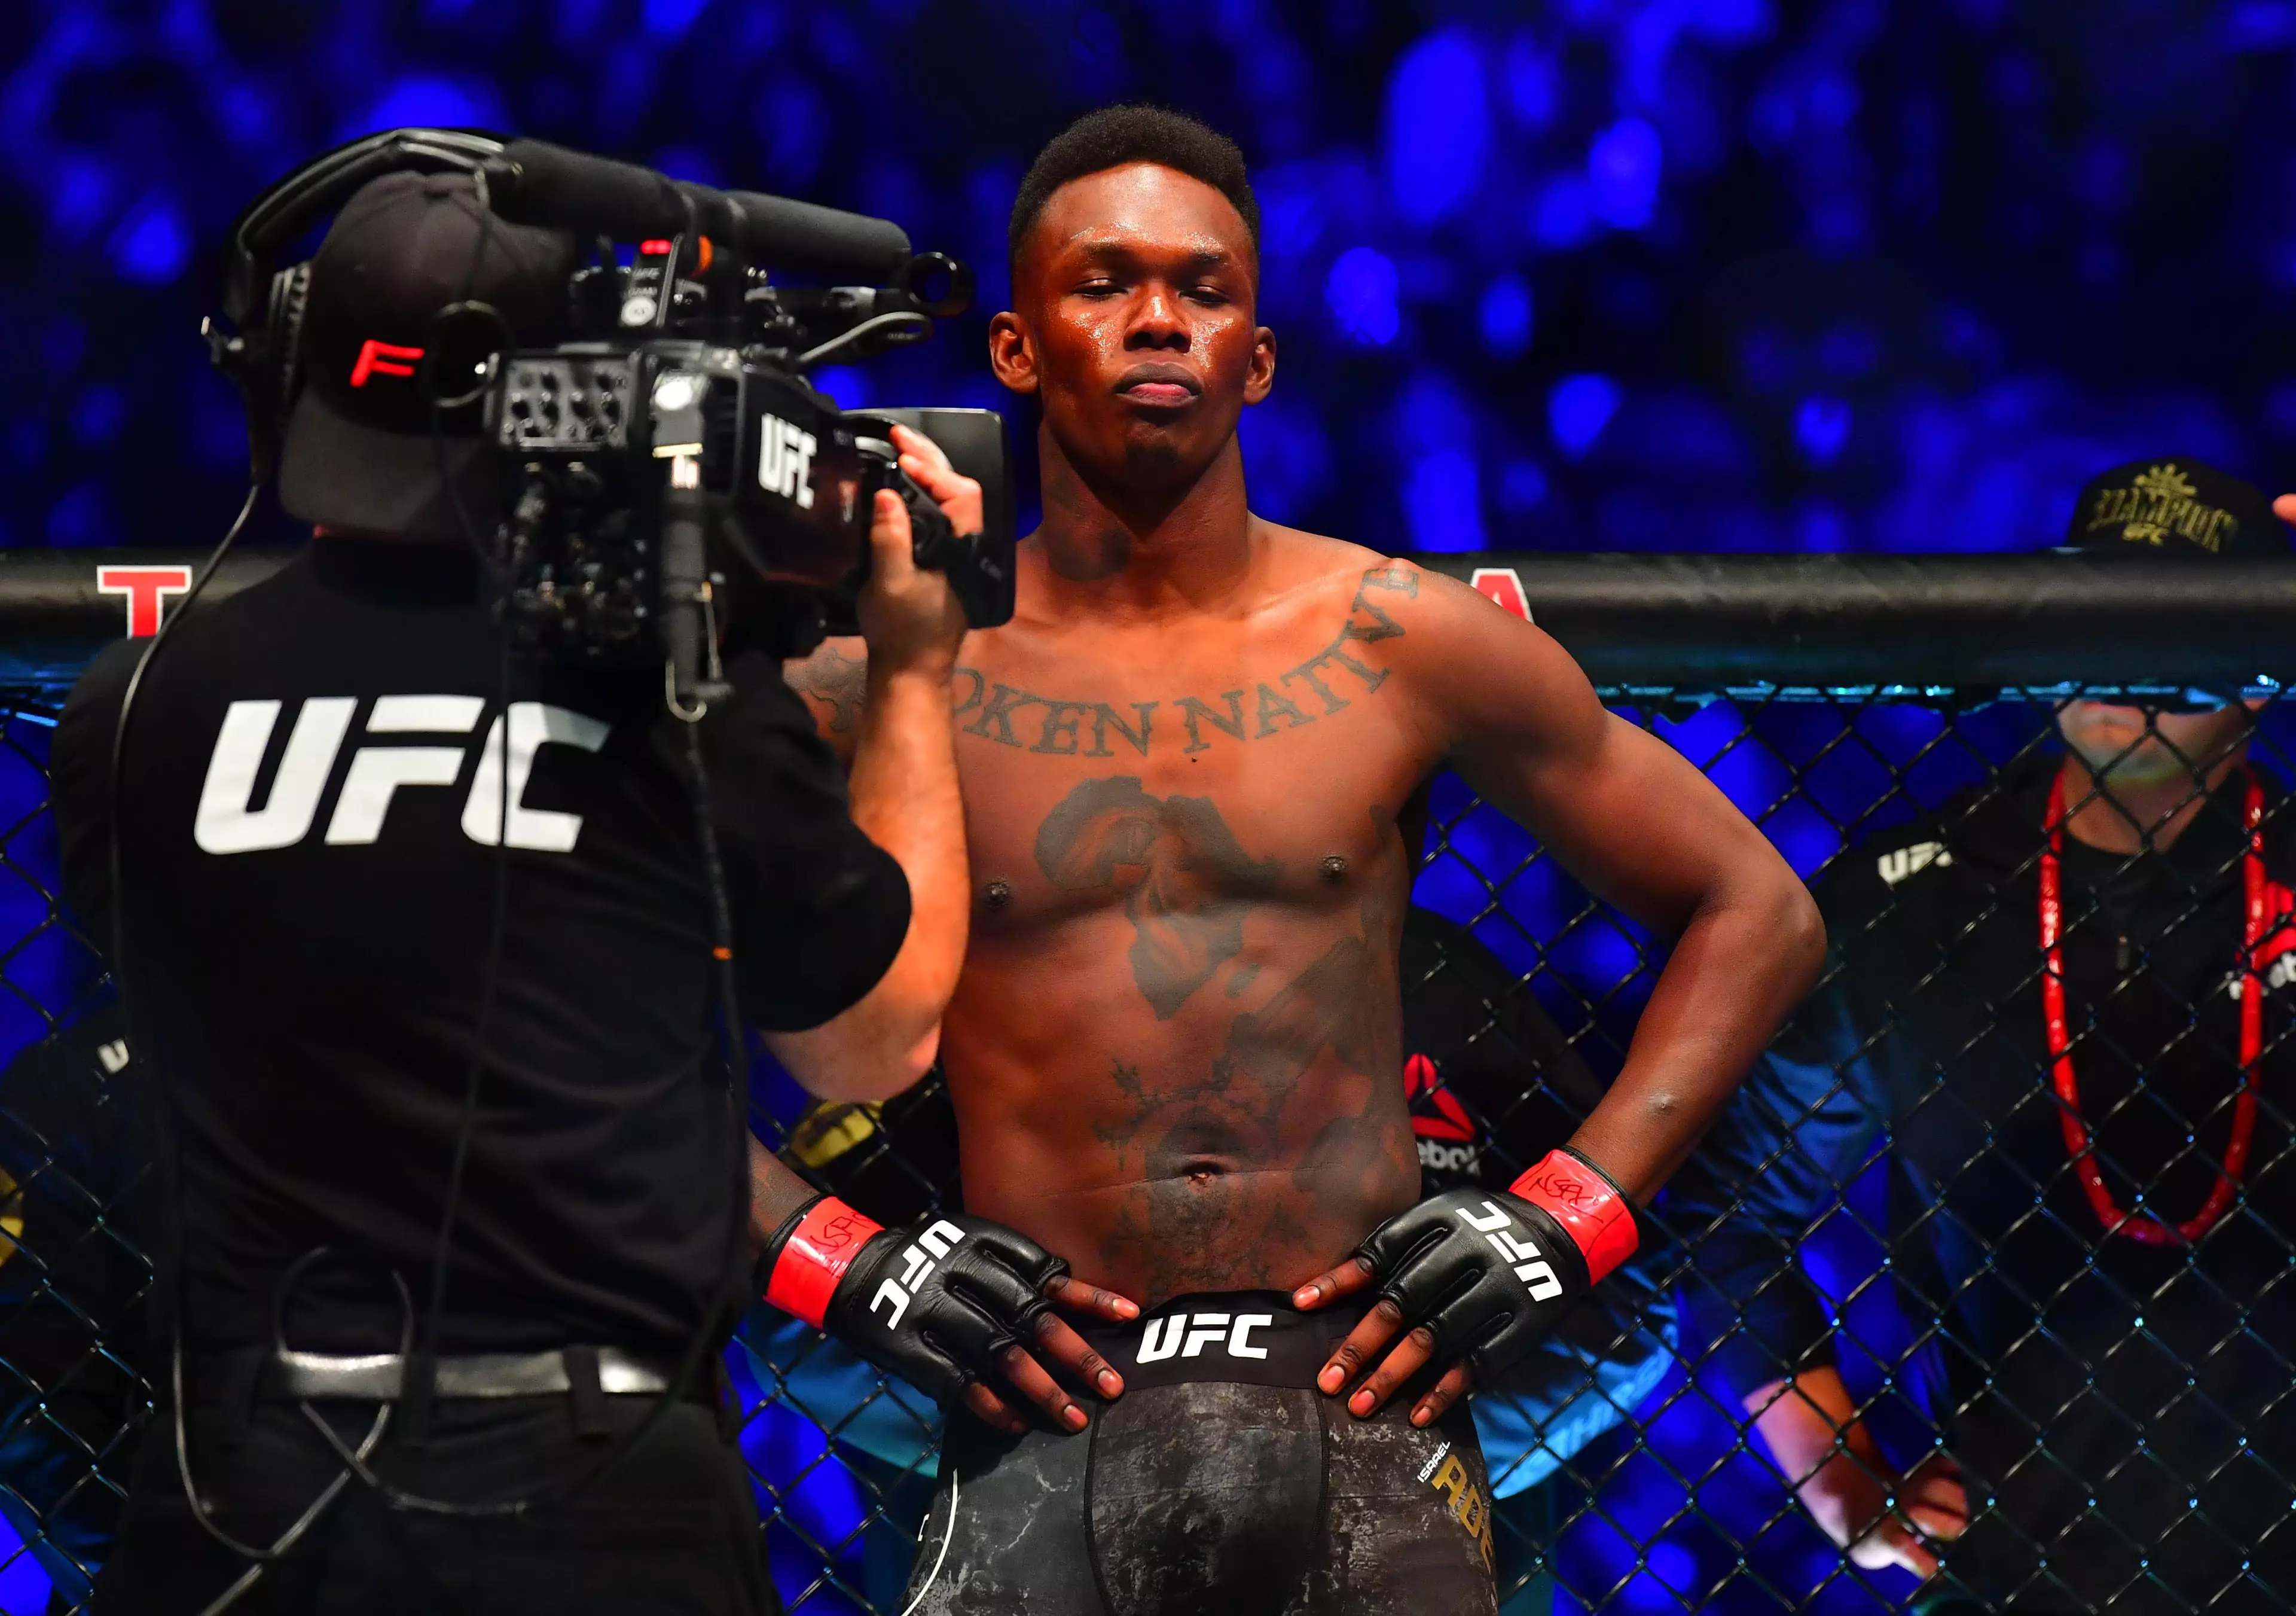 Israel Adesanya has become one of the biggest sports stars on the planet.